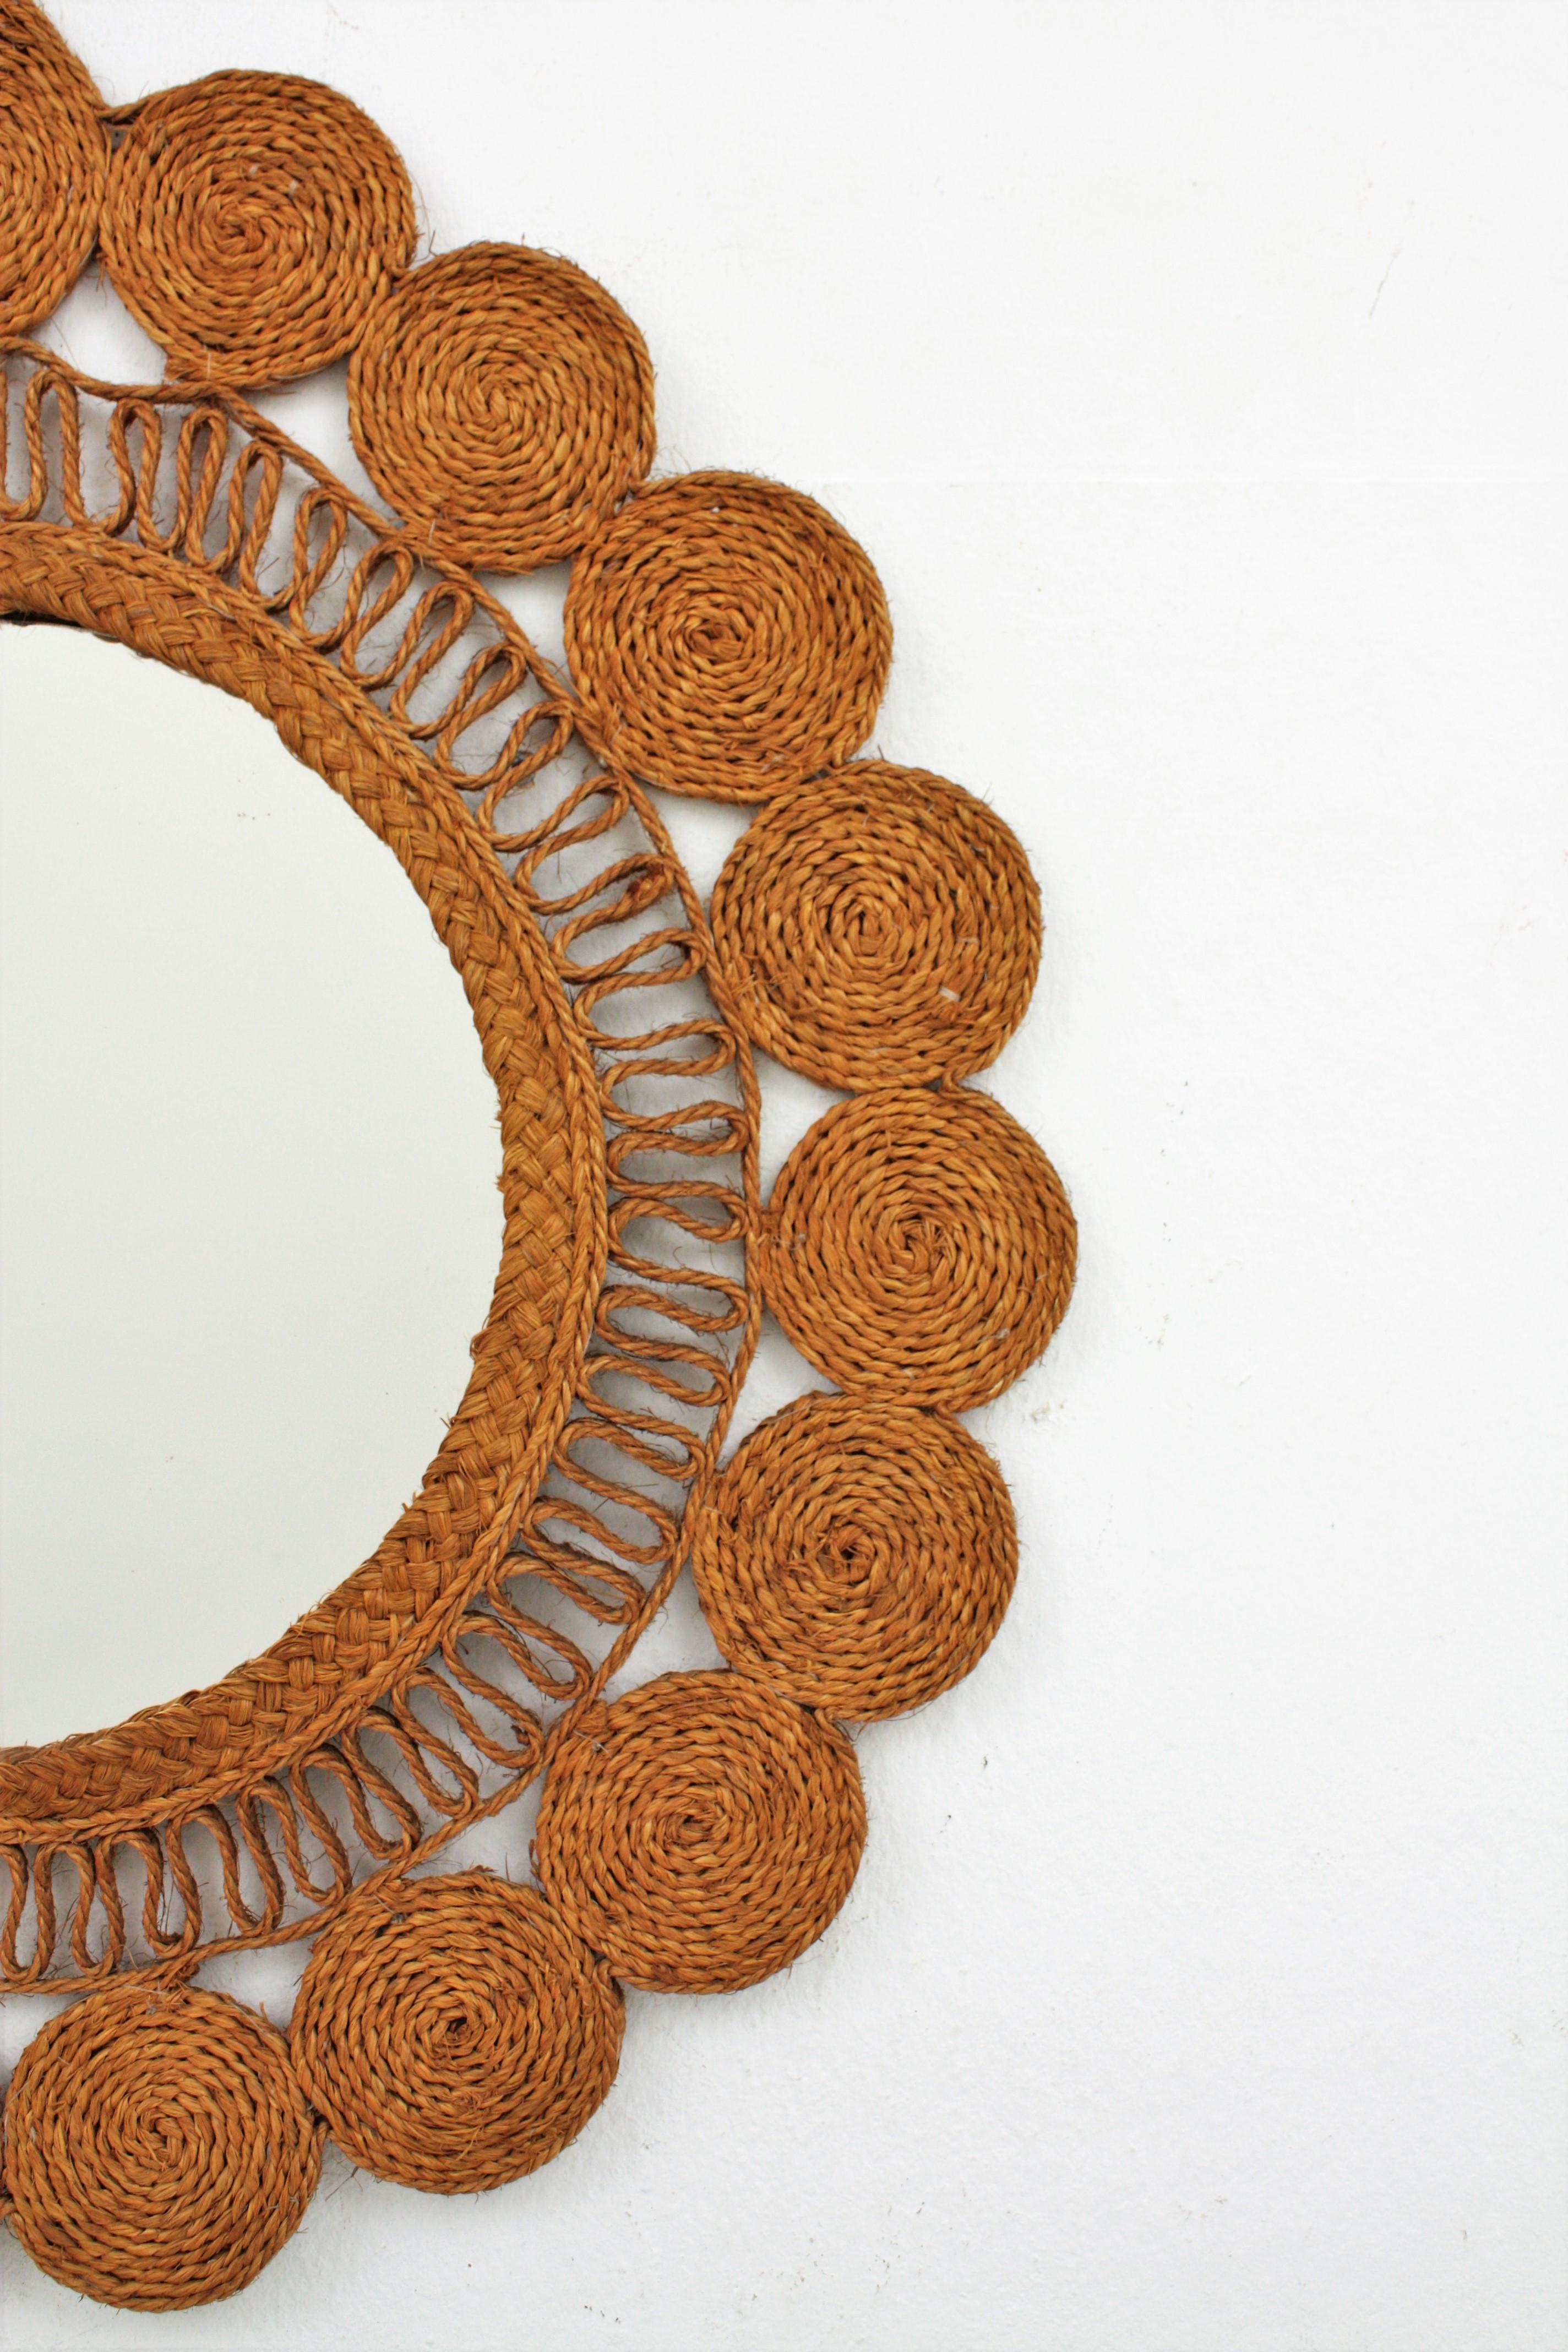 Woven Esparto Rope Wall Mirror, Spain, 1960s For Sale 2